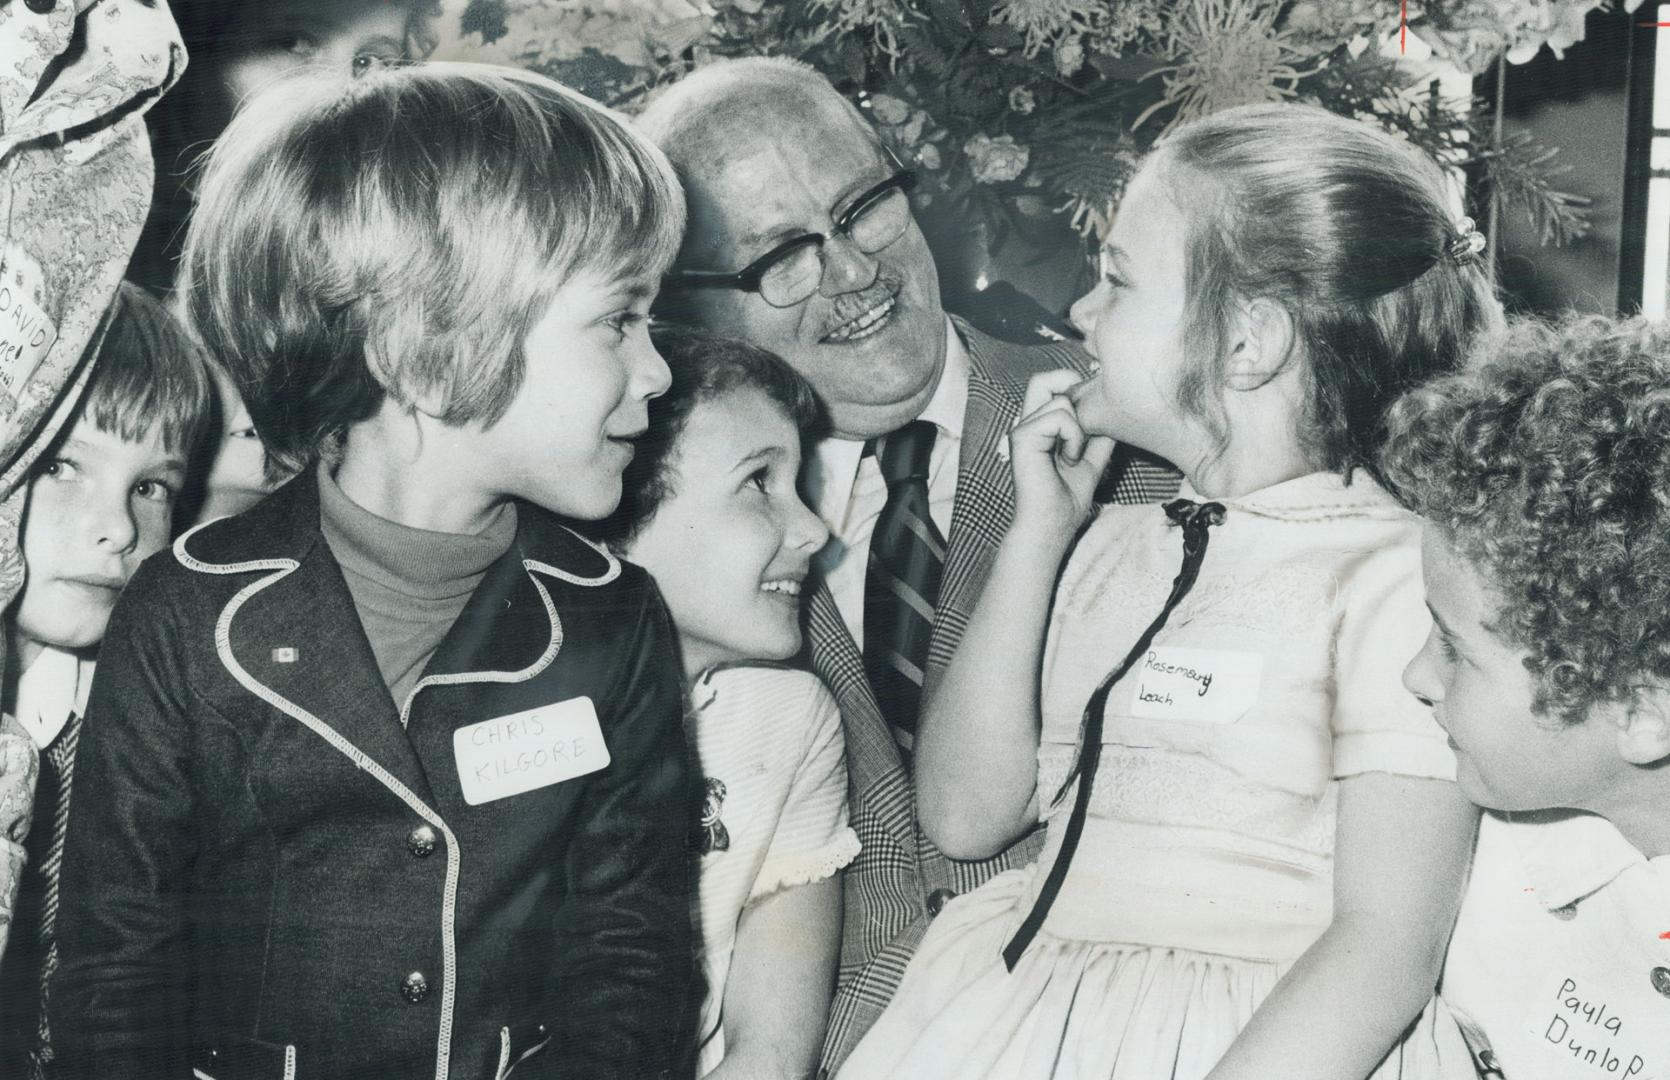 Look, no cavities: Seven-year-old Rosemary Leach shows Dr. Stewart MacGregor and other young former patients how he kept her teeth in good shape. The (...)